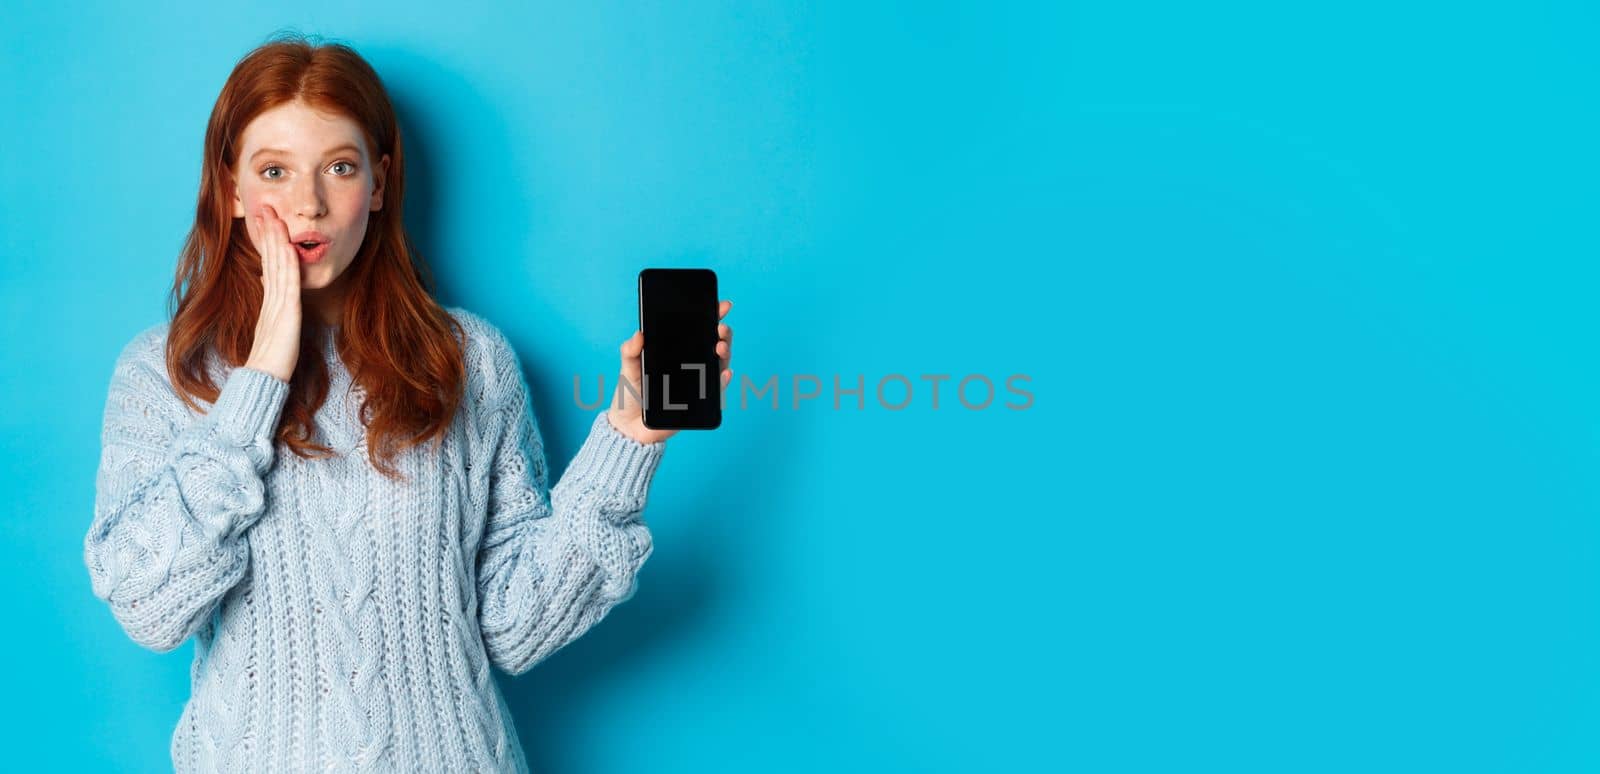 Amazed redhead girl looking at camera, showing smartphone screen, demonstrating online offer, standing over blue background.